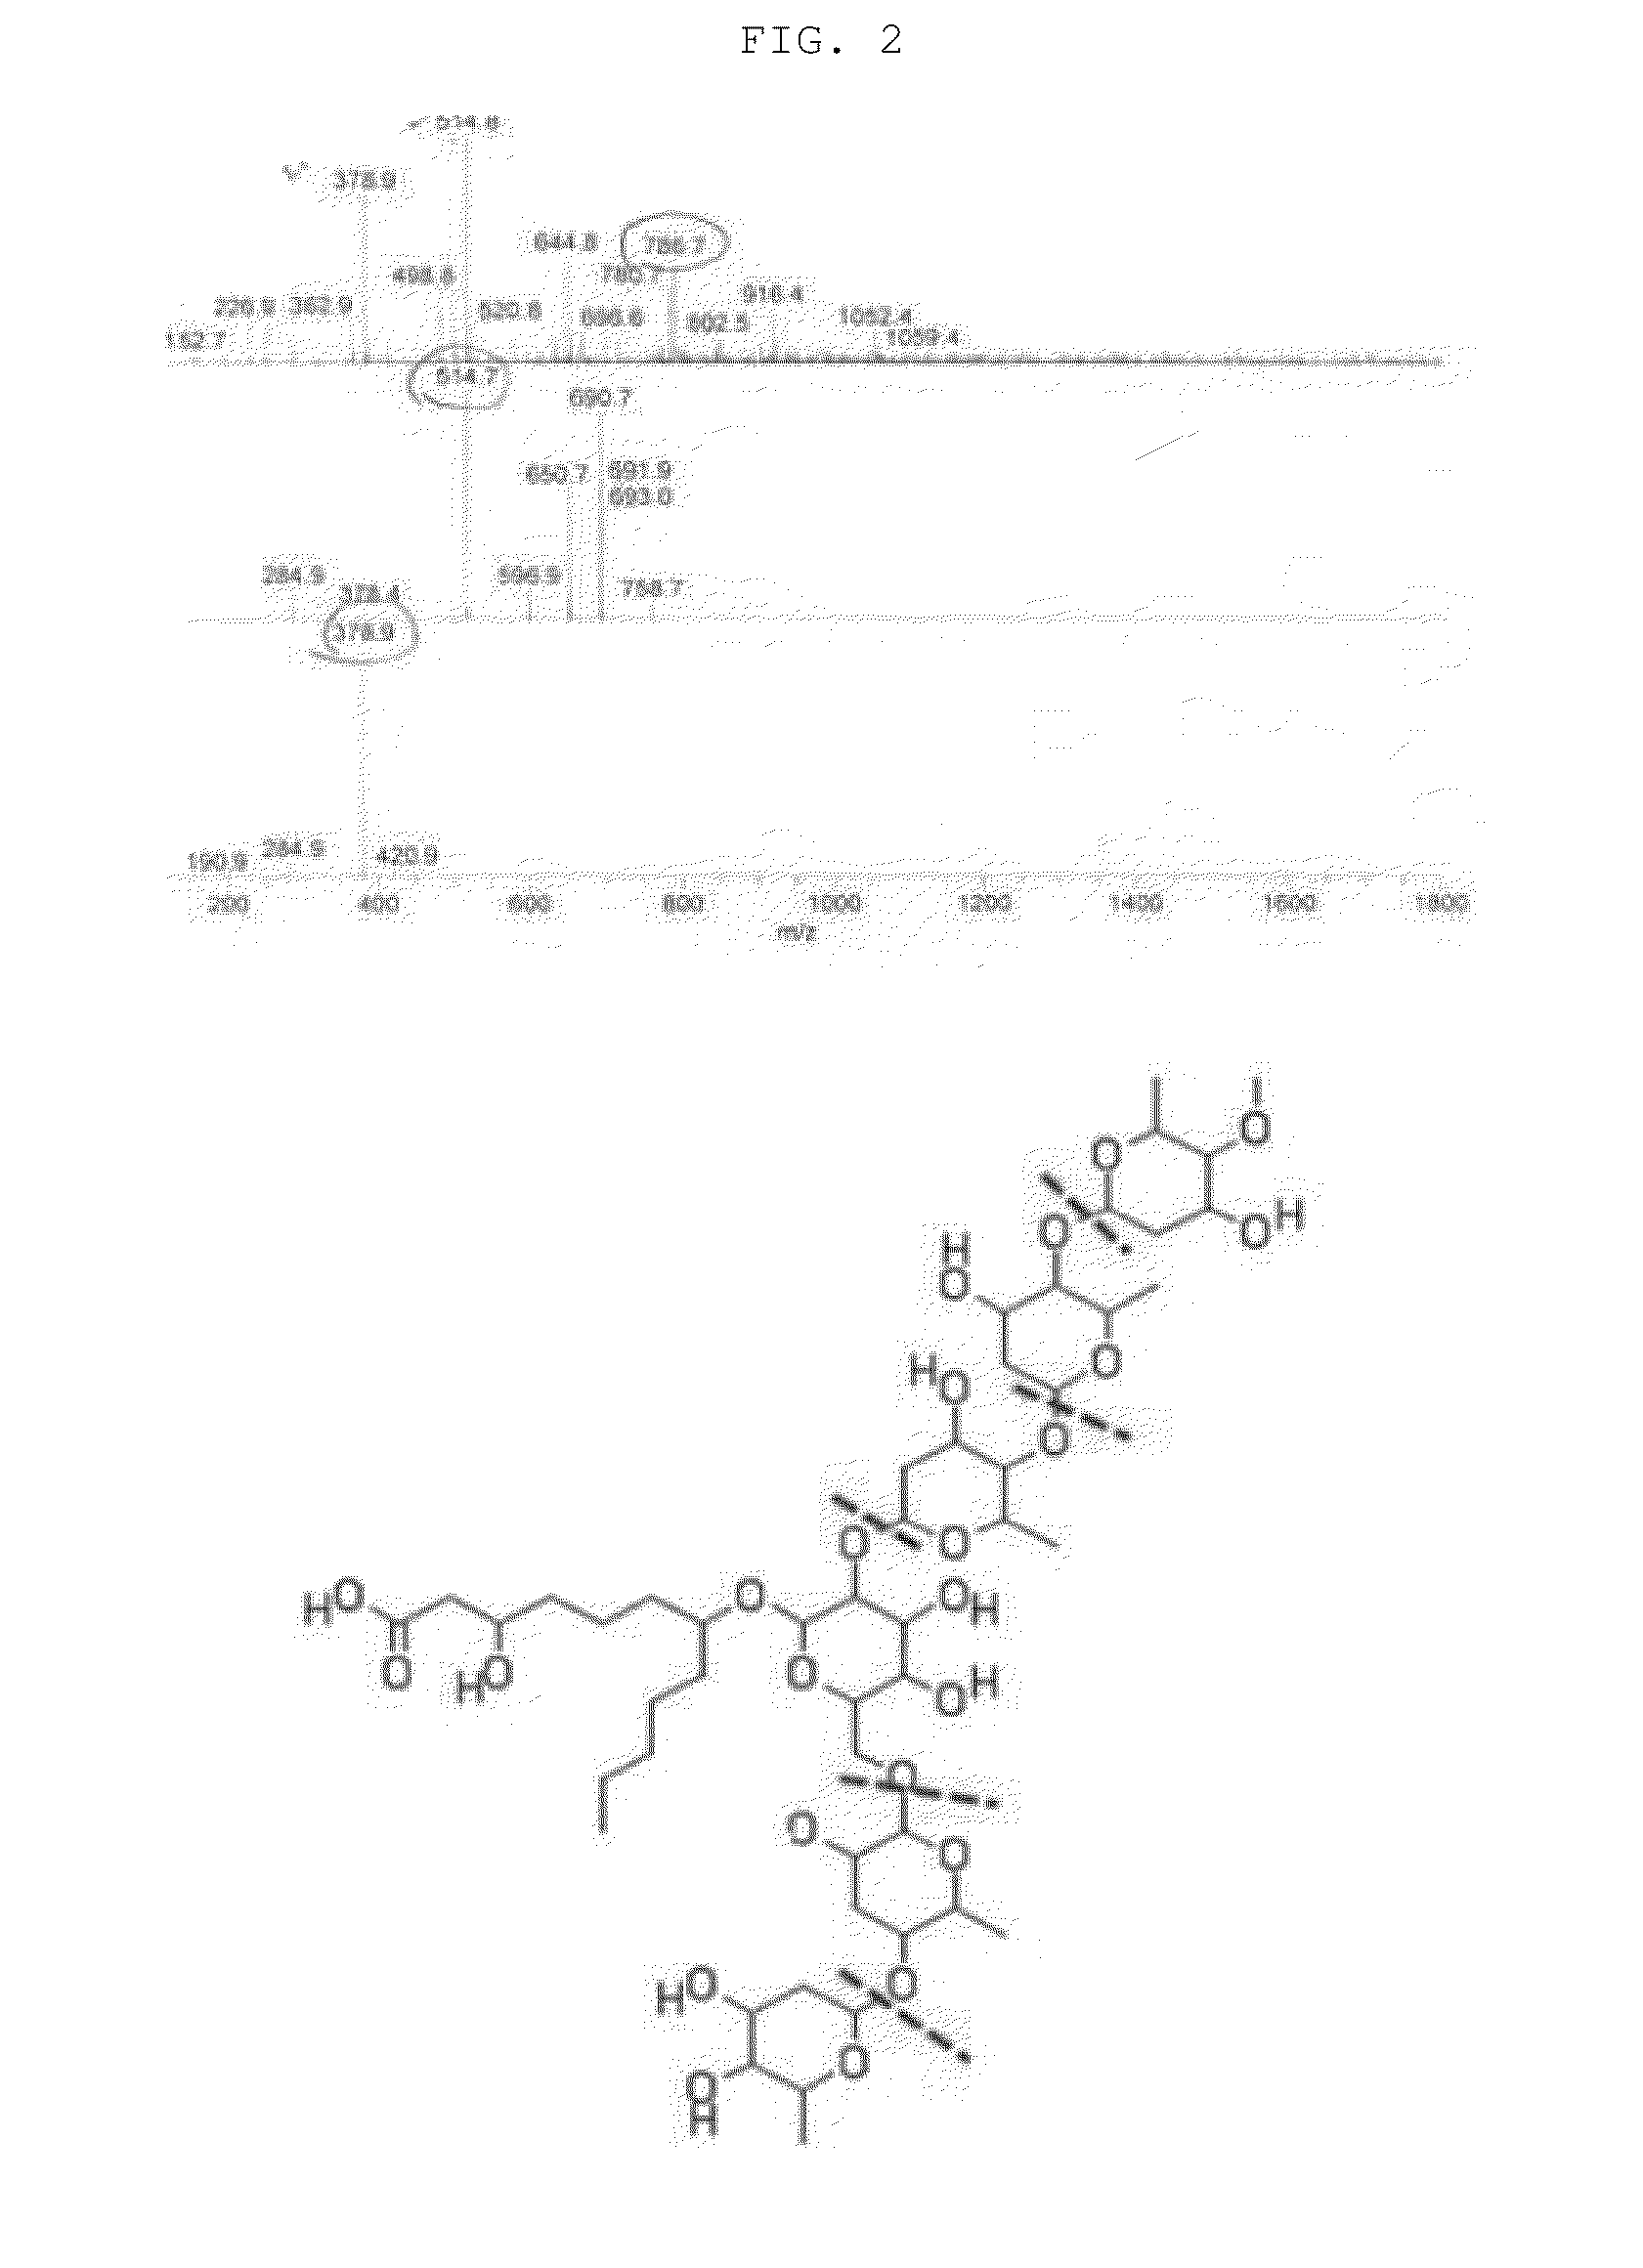 Novel compound isolated from quamoclit, and composition for preventing or treating diabetes containing the compound as an active ingredient